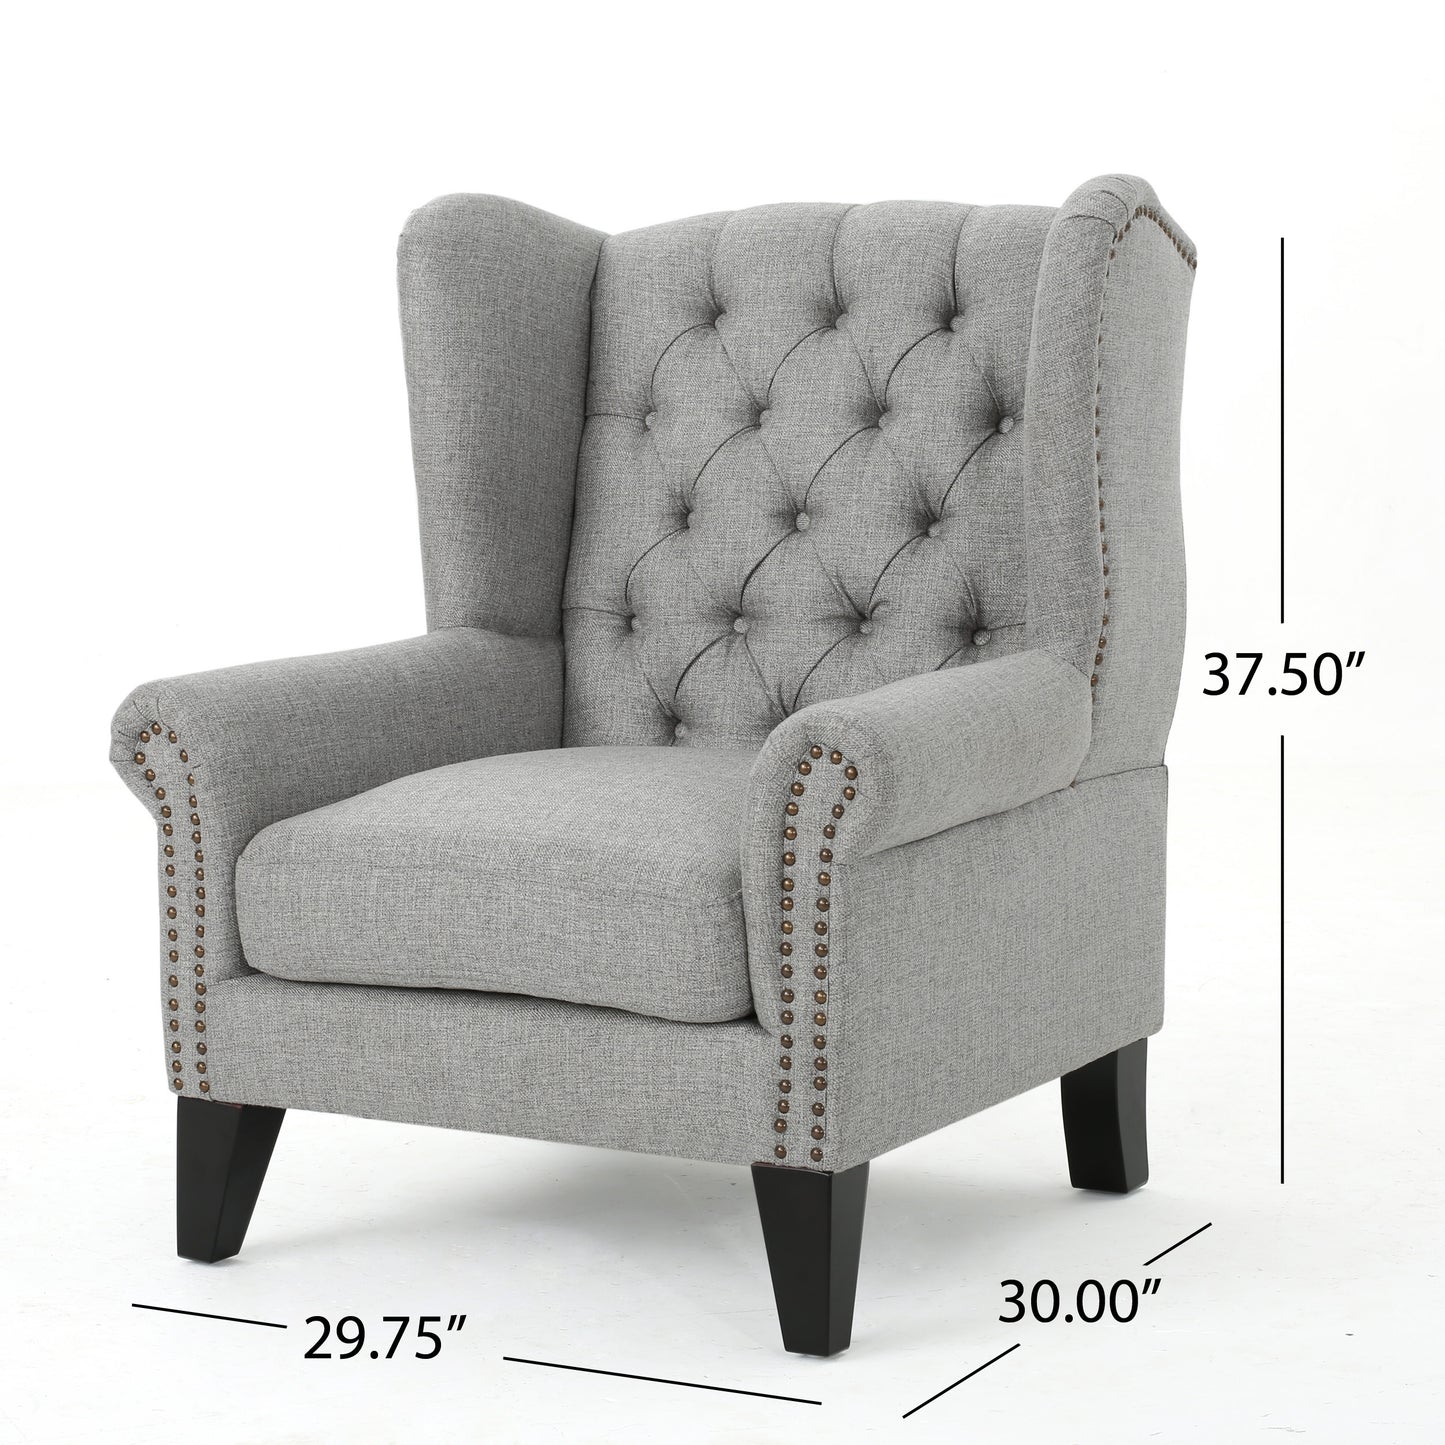 Lainie Traditional Tufted Winged Fabric Accent Chair